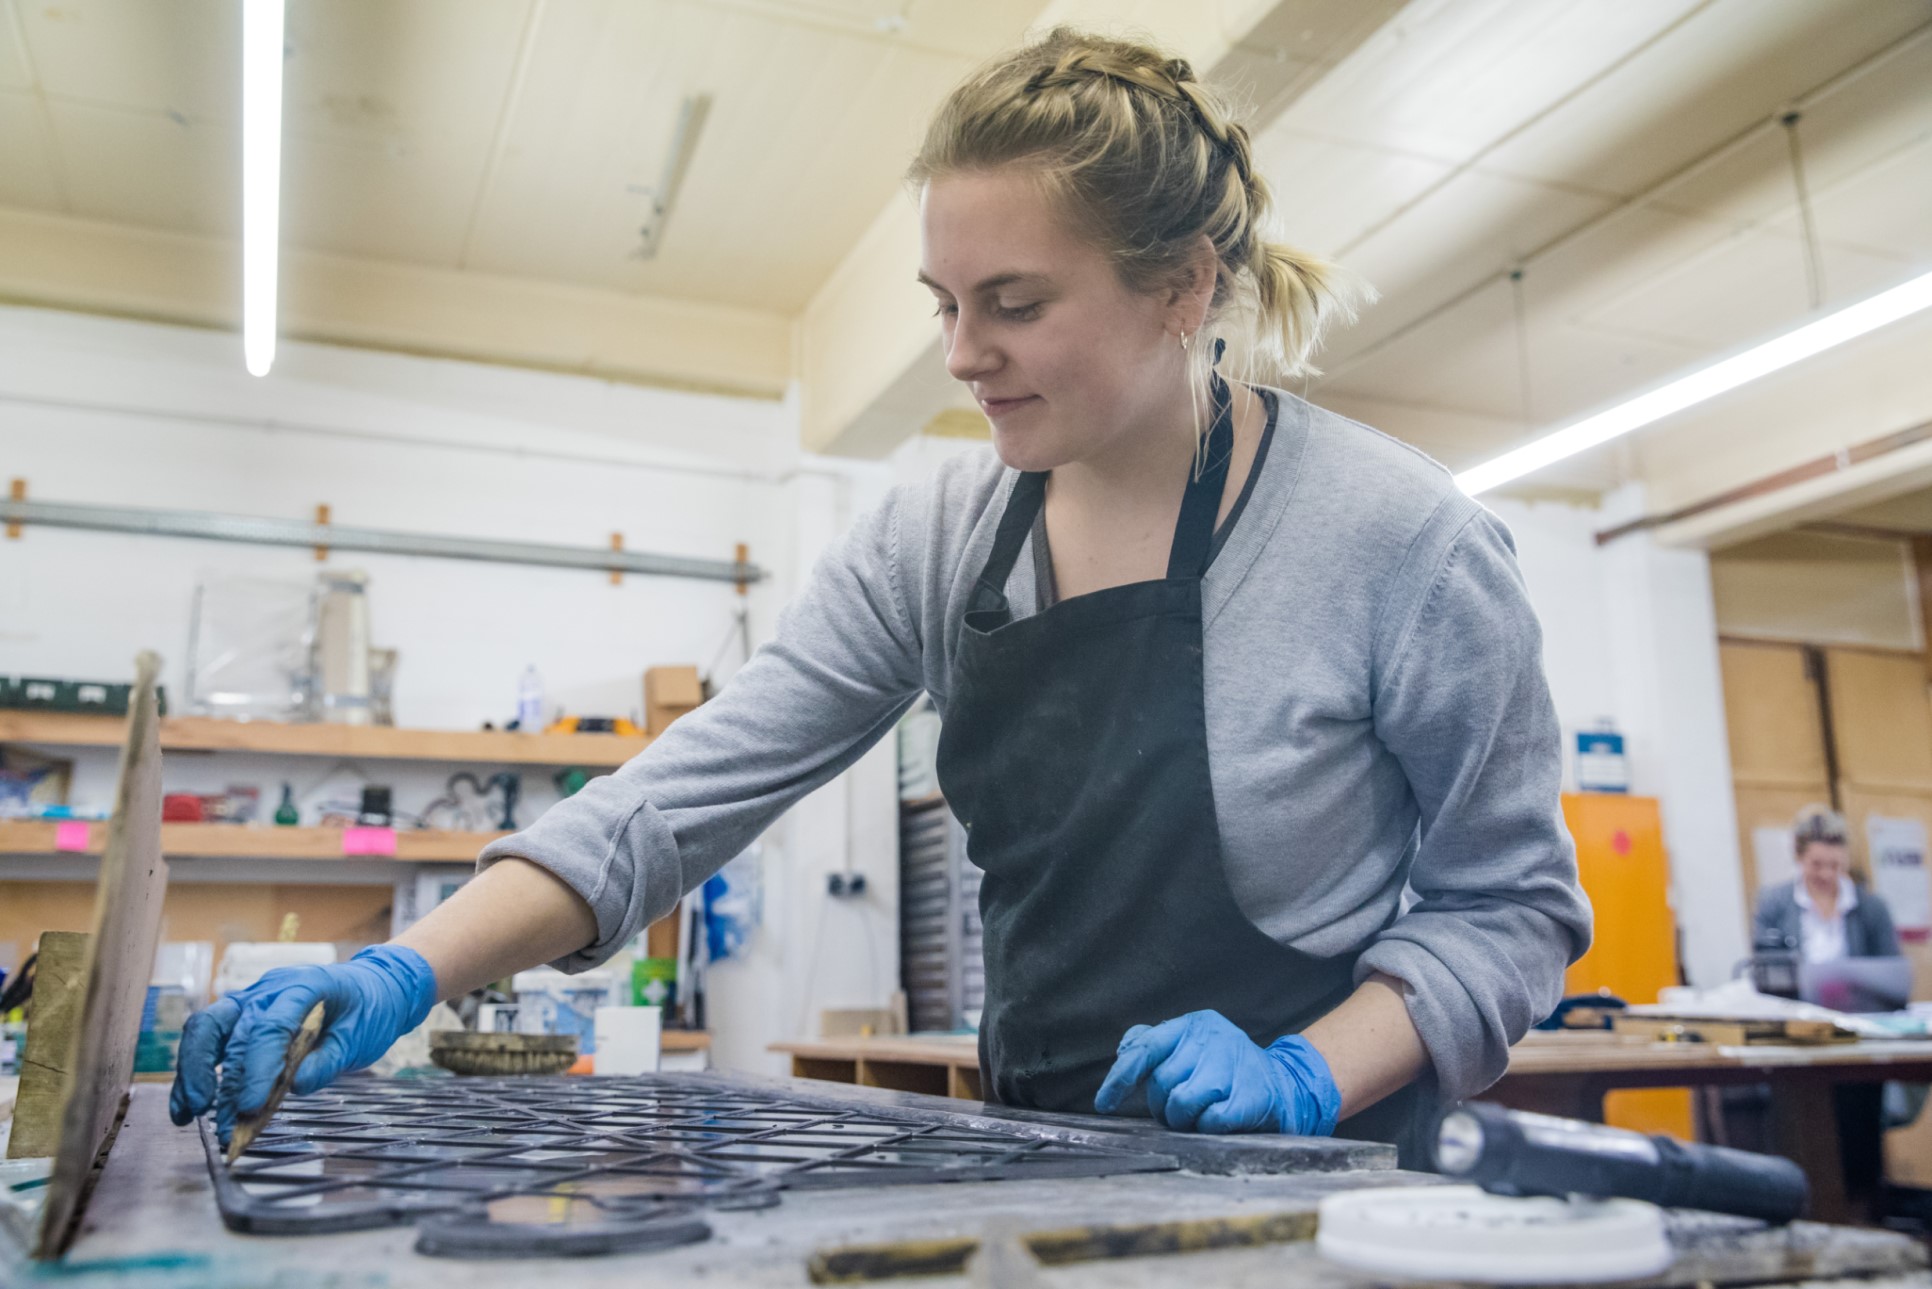 An art student creating a stained glass window in her placement year role